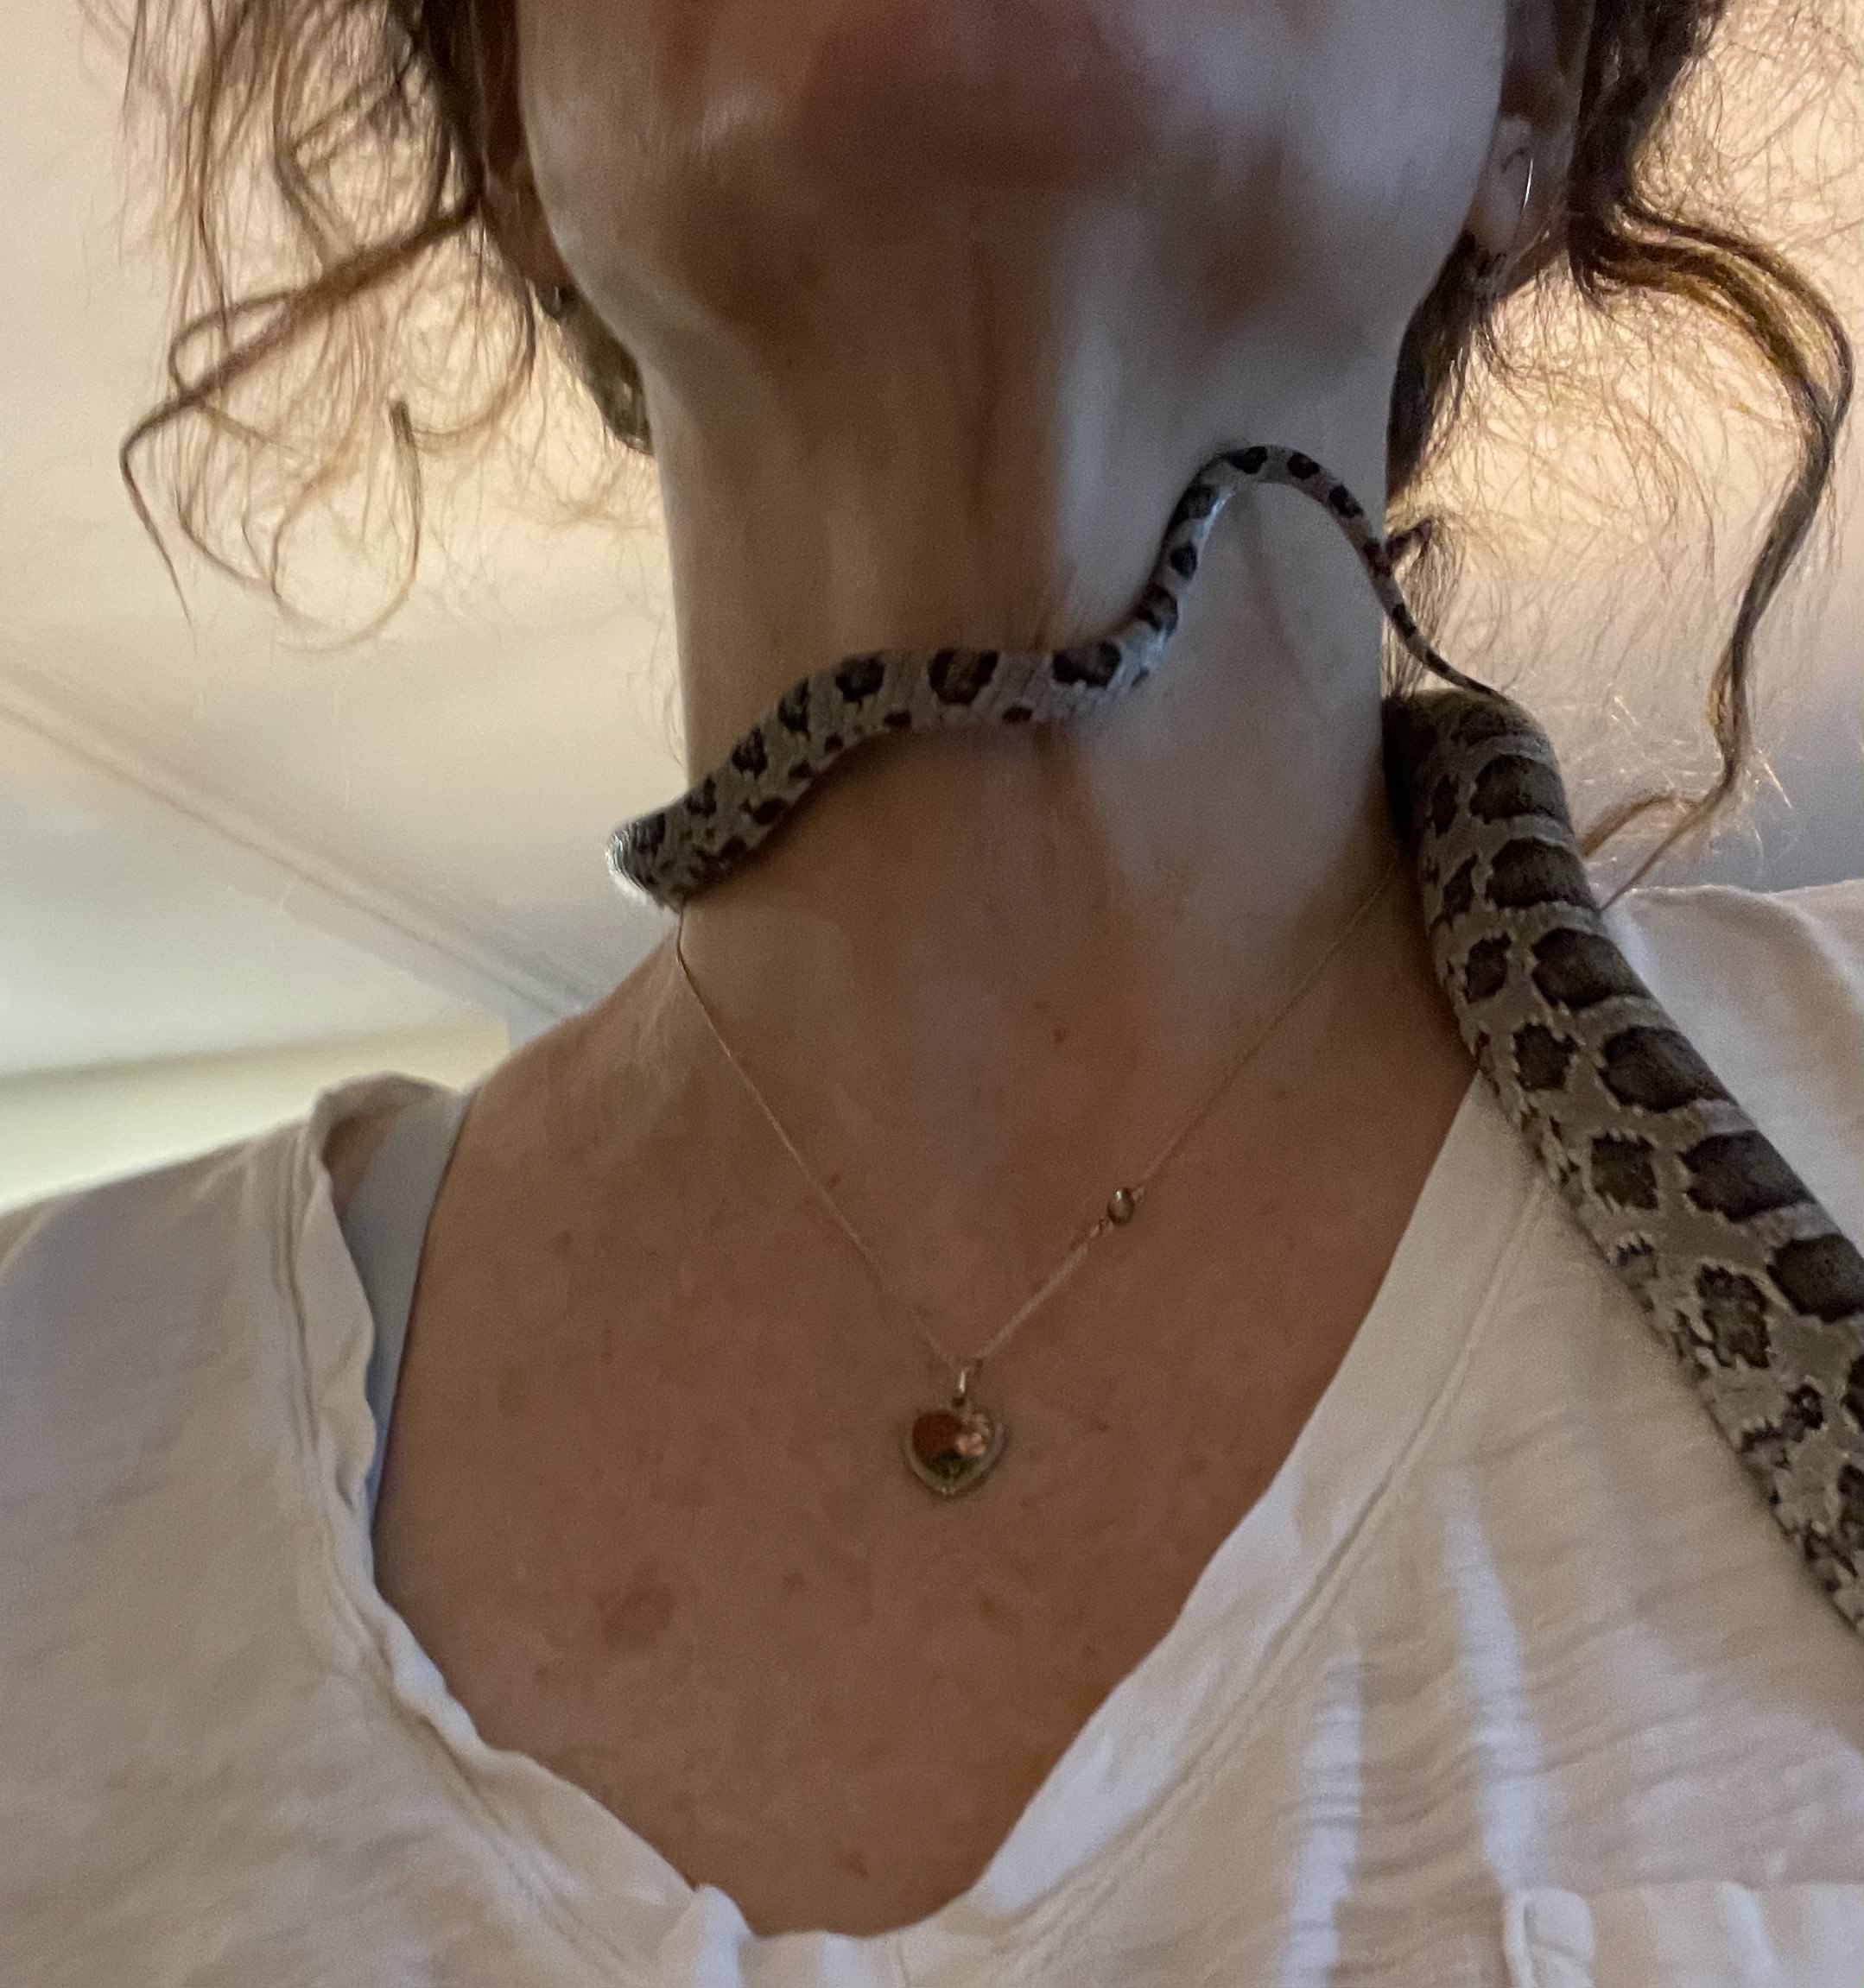 A snake is wrapped around someones neck